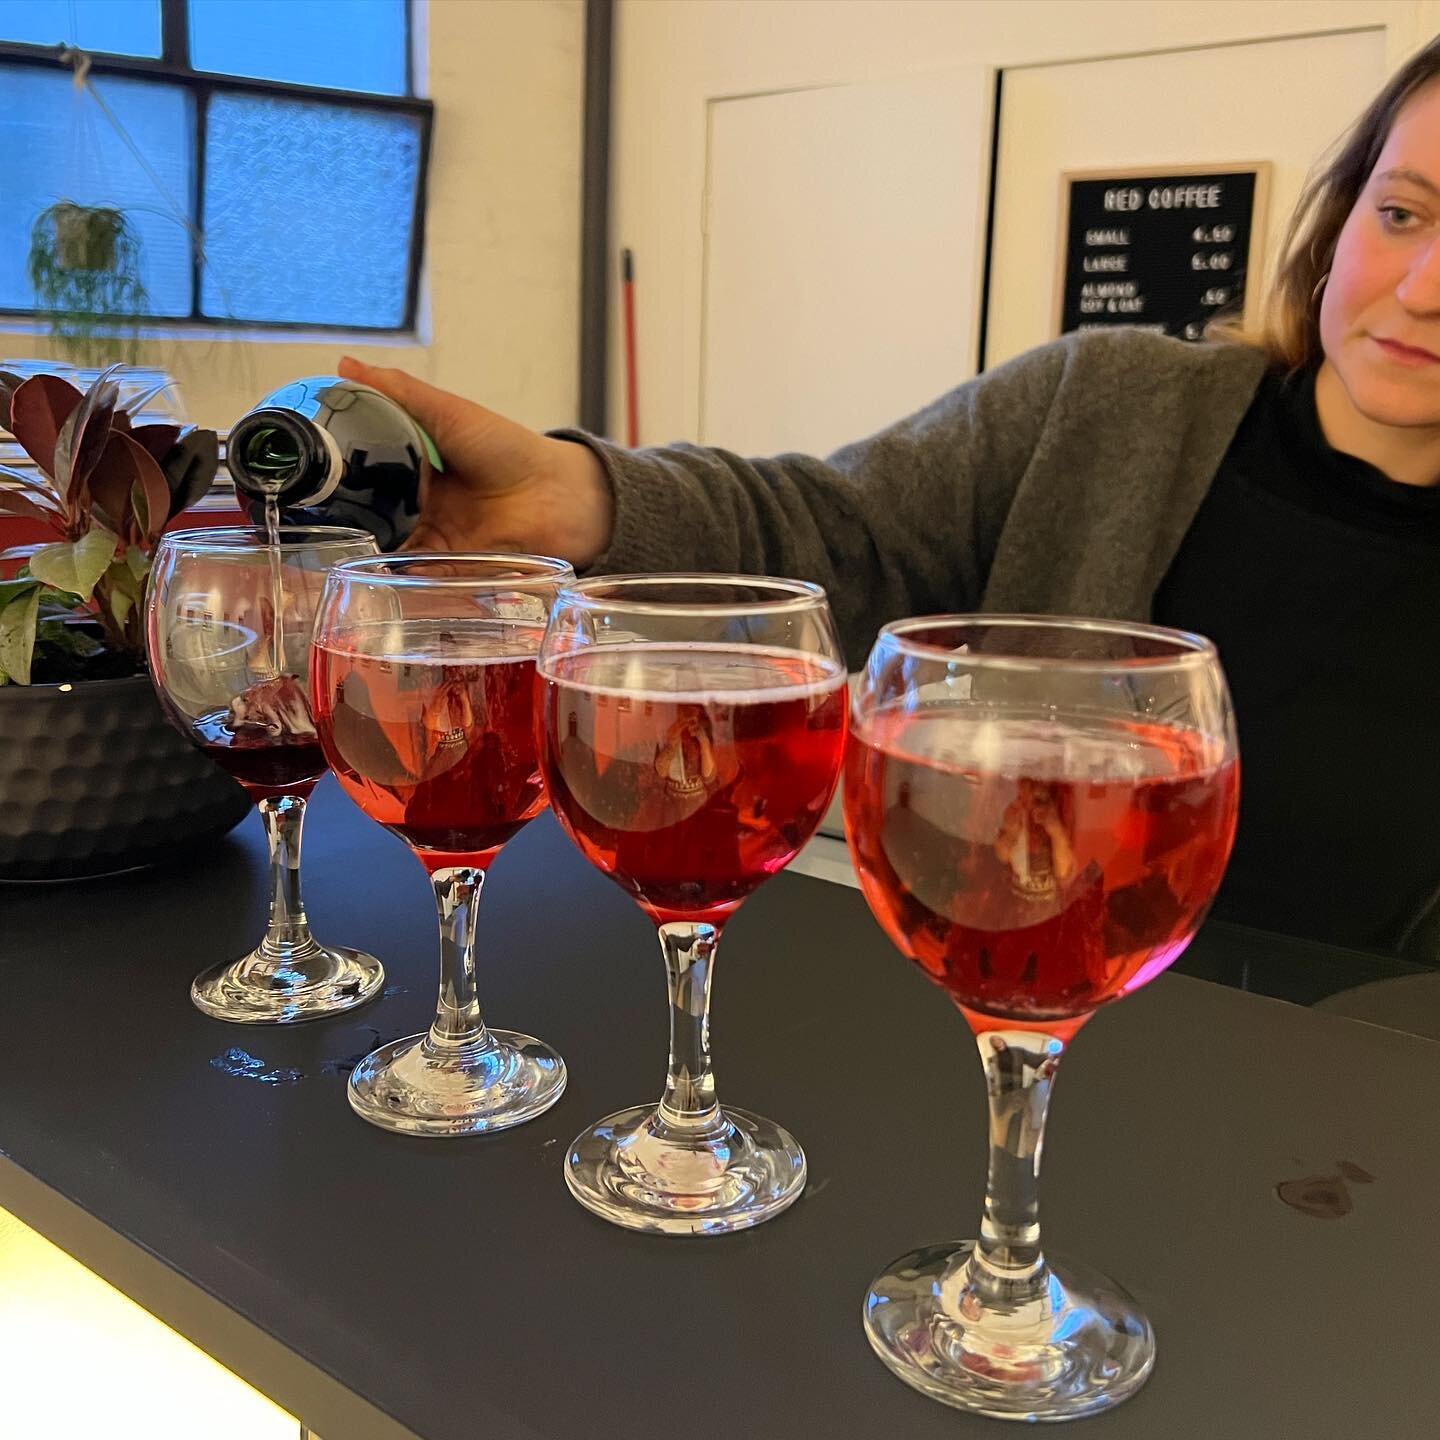 The always effervescent Vee pouring edible hibiscus flower spritz drinks for our Life Drawing event. Spring is in the air.#lifedrawing #art #artclass #lifedrawings #melbournelifedrawing #drawingclass #figurativeart #figurativedrawing #lifemodel #melb